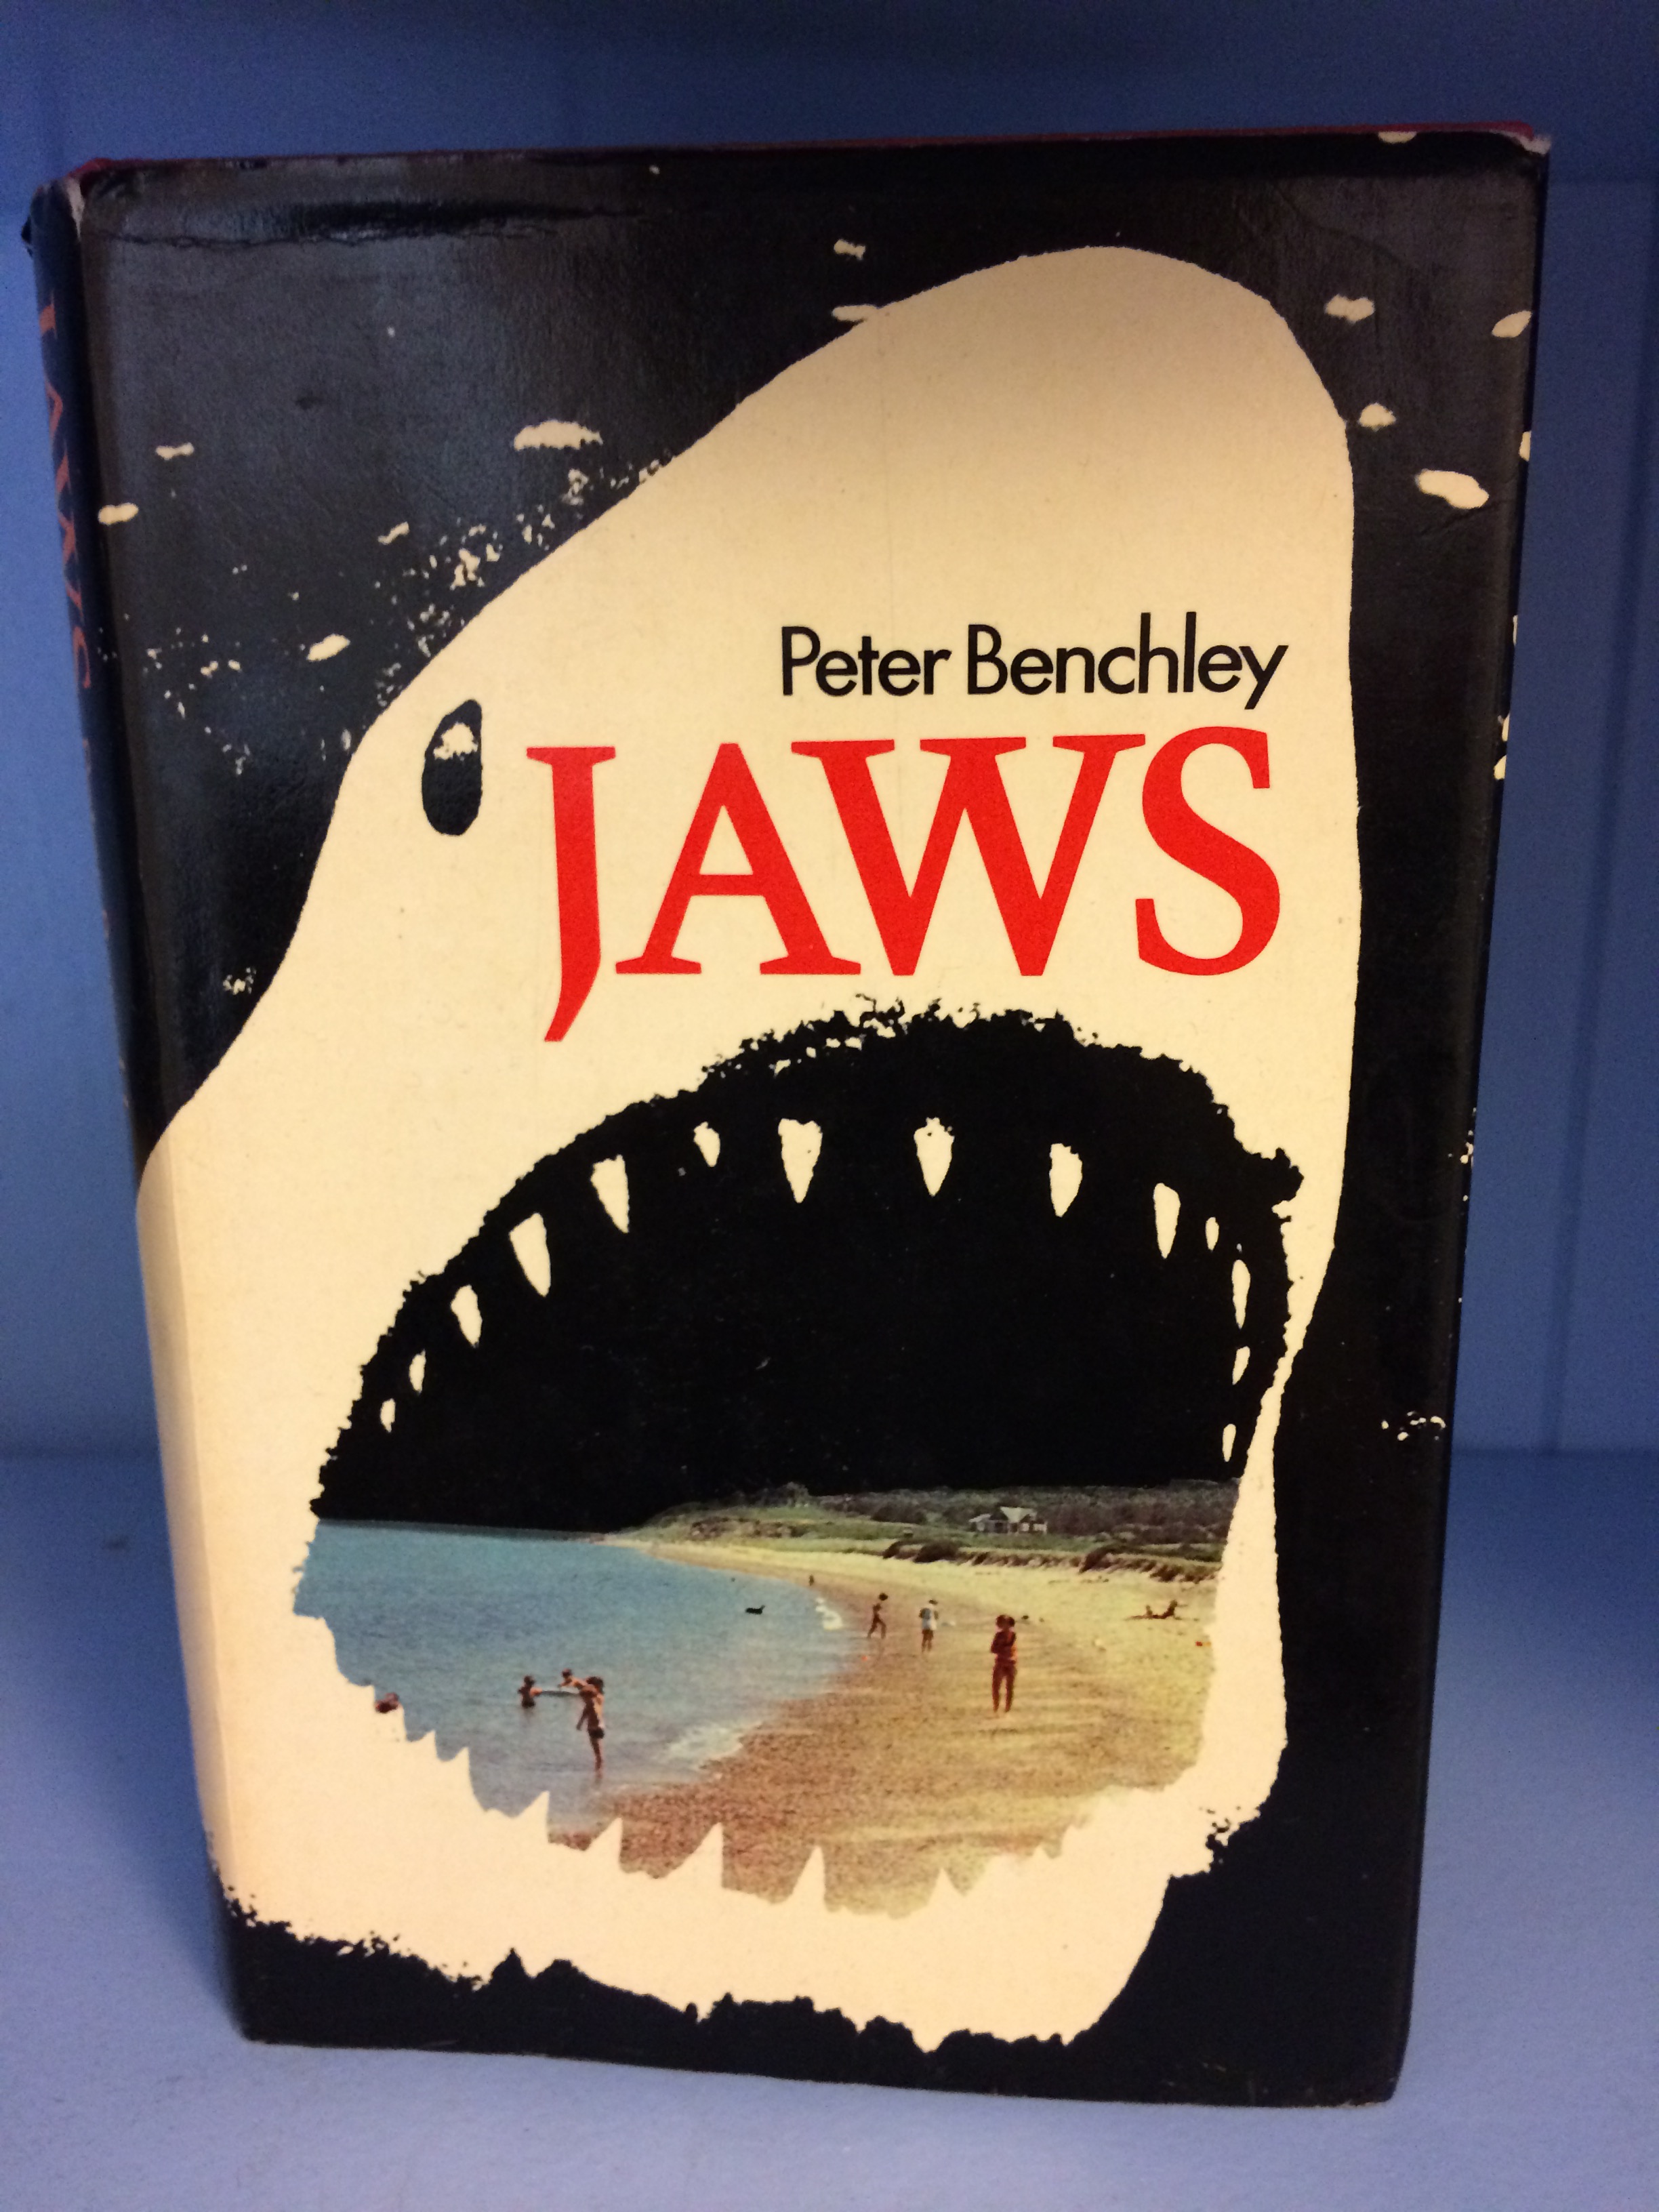 A book stood up on a blue shelf. The cover is mostly black and white with the white being the Shark. Peter Benchley and Jaws are in a large typeface on the Sharks face, JAWS is in a bolder red font. In the mouth of the shark is Amity beach, some children are swimming in the water, and others can be seen on the beach.